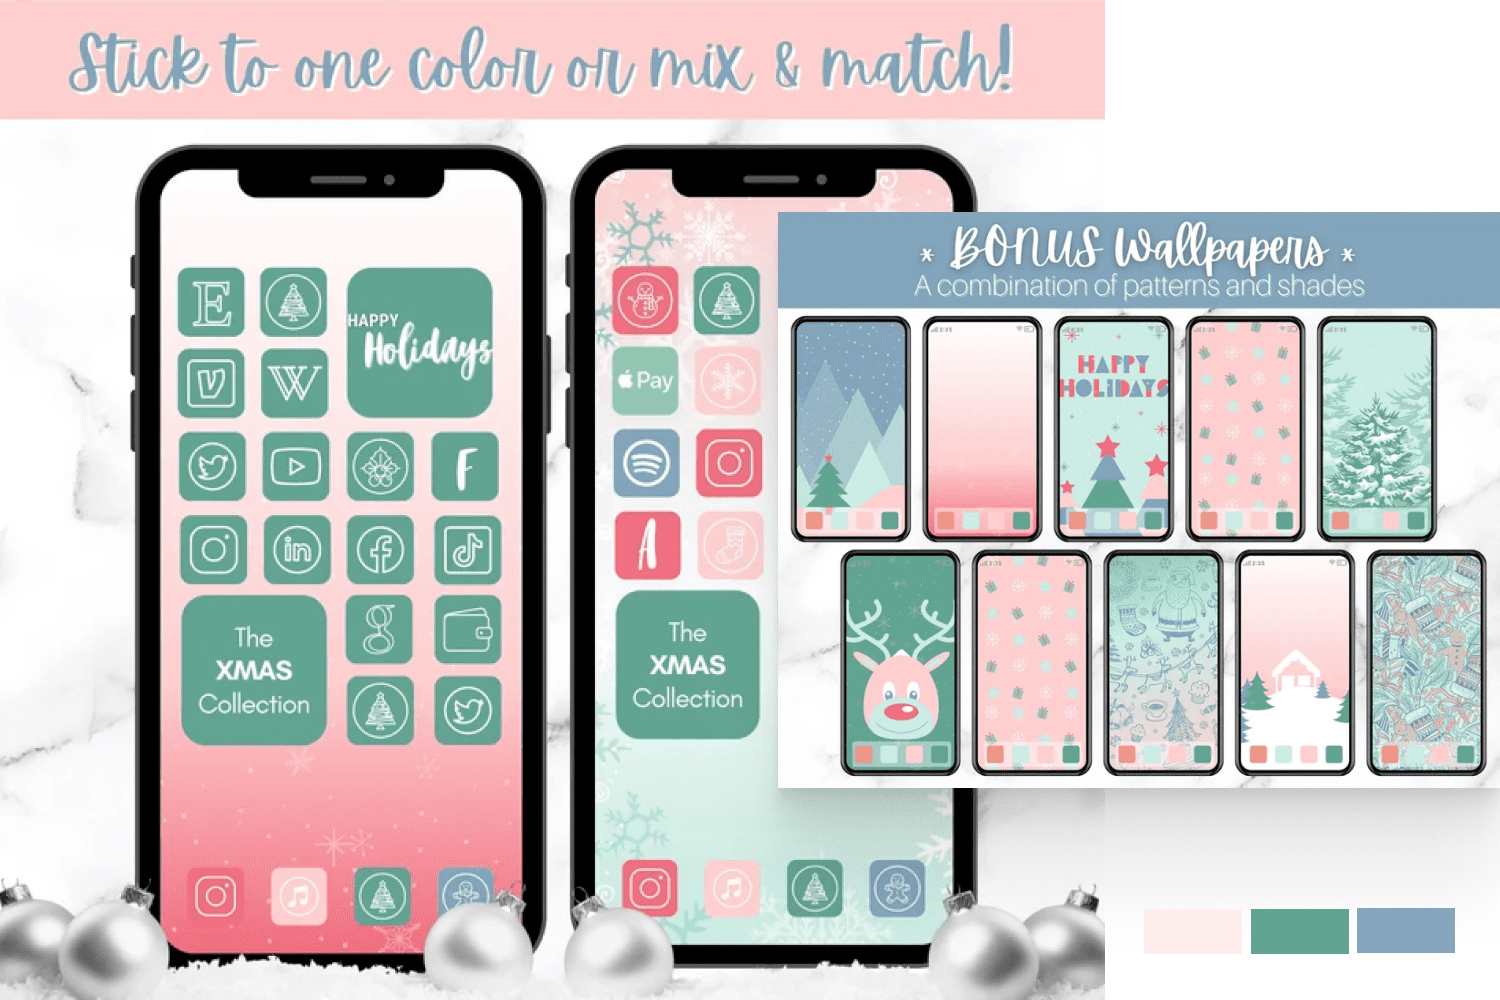 Collage of Christmas themed icons in pink and green colors.